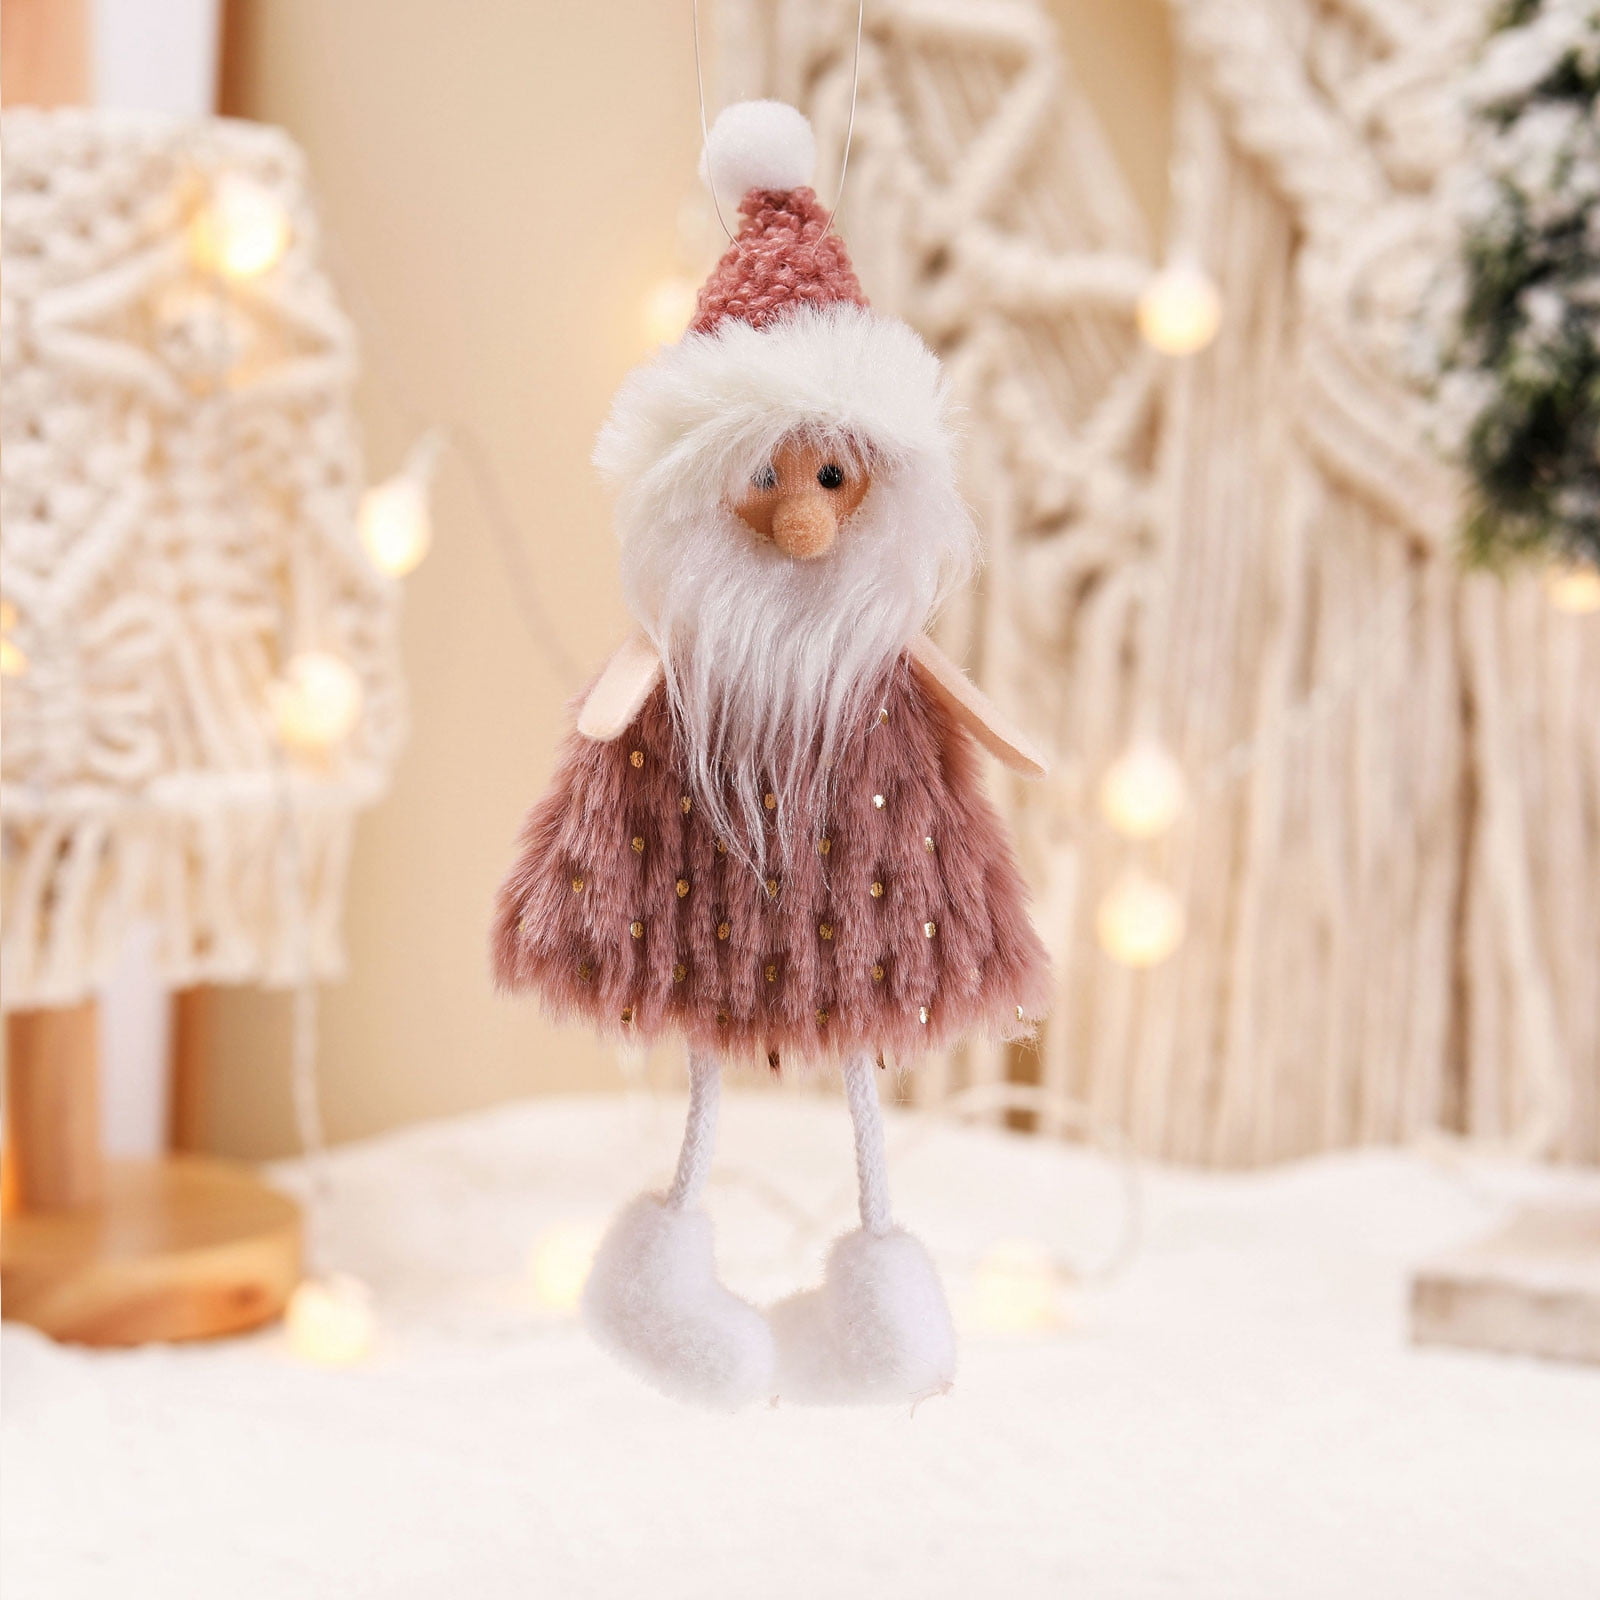 WQJNWEQ Clearance Home Christmas Tree Pendant Creative Santa Claus Snowman  Doll Hanging Foot Ornaments Shopping Mall Door Ornaments Fall sale